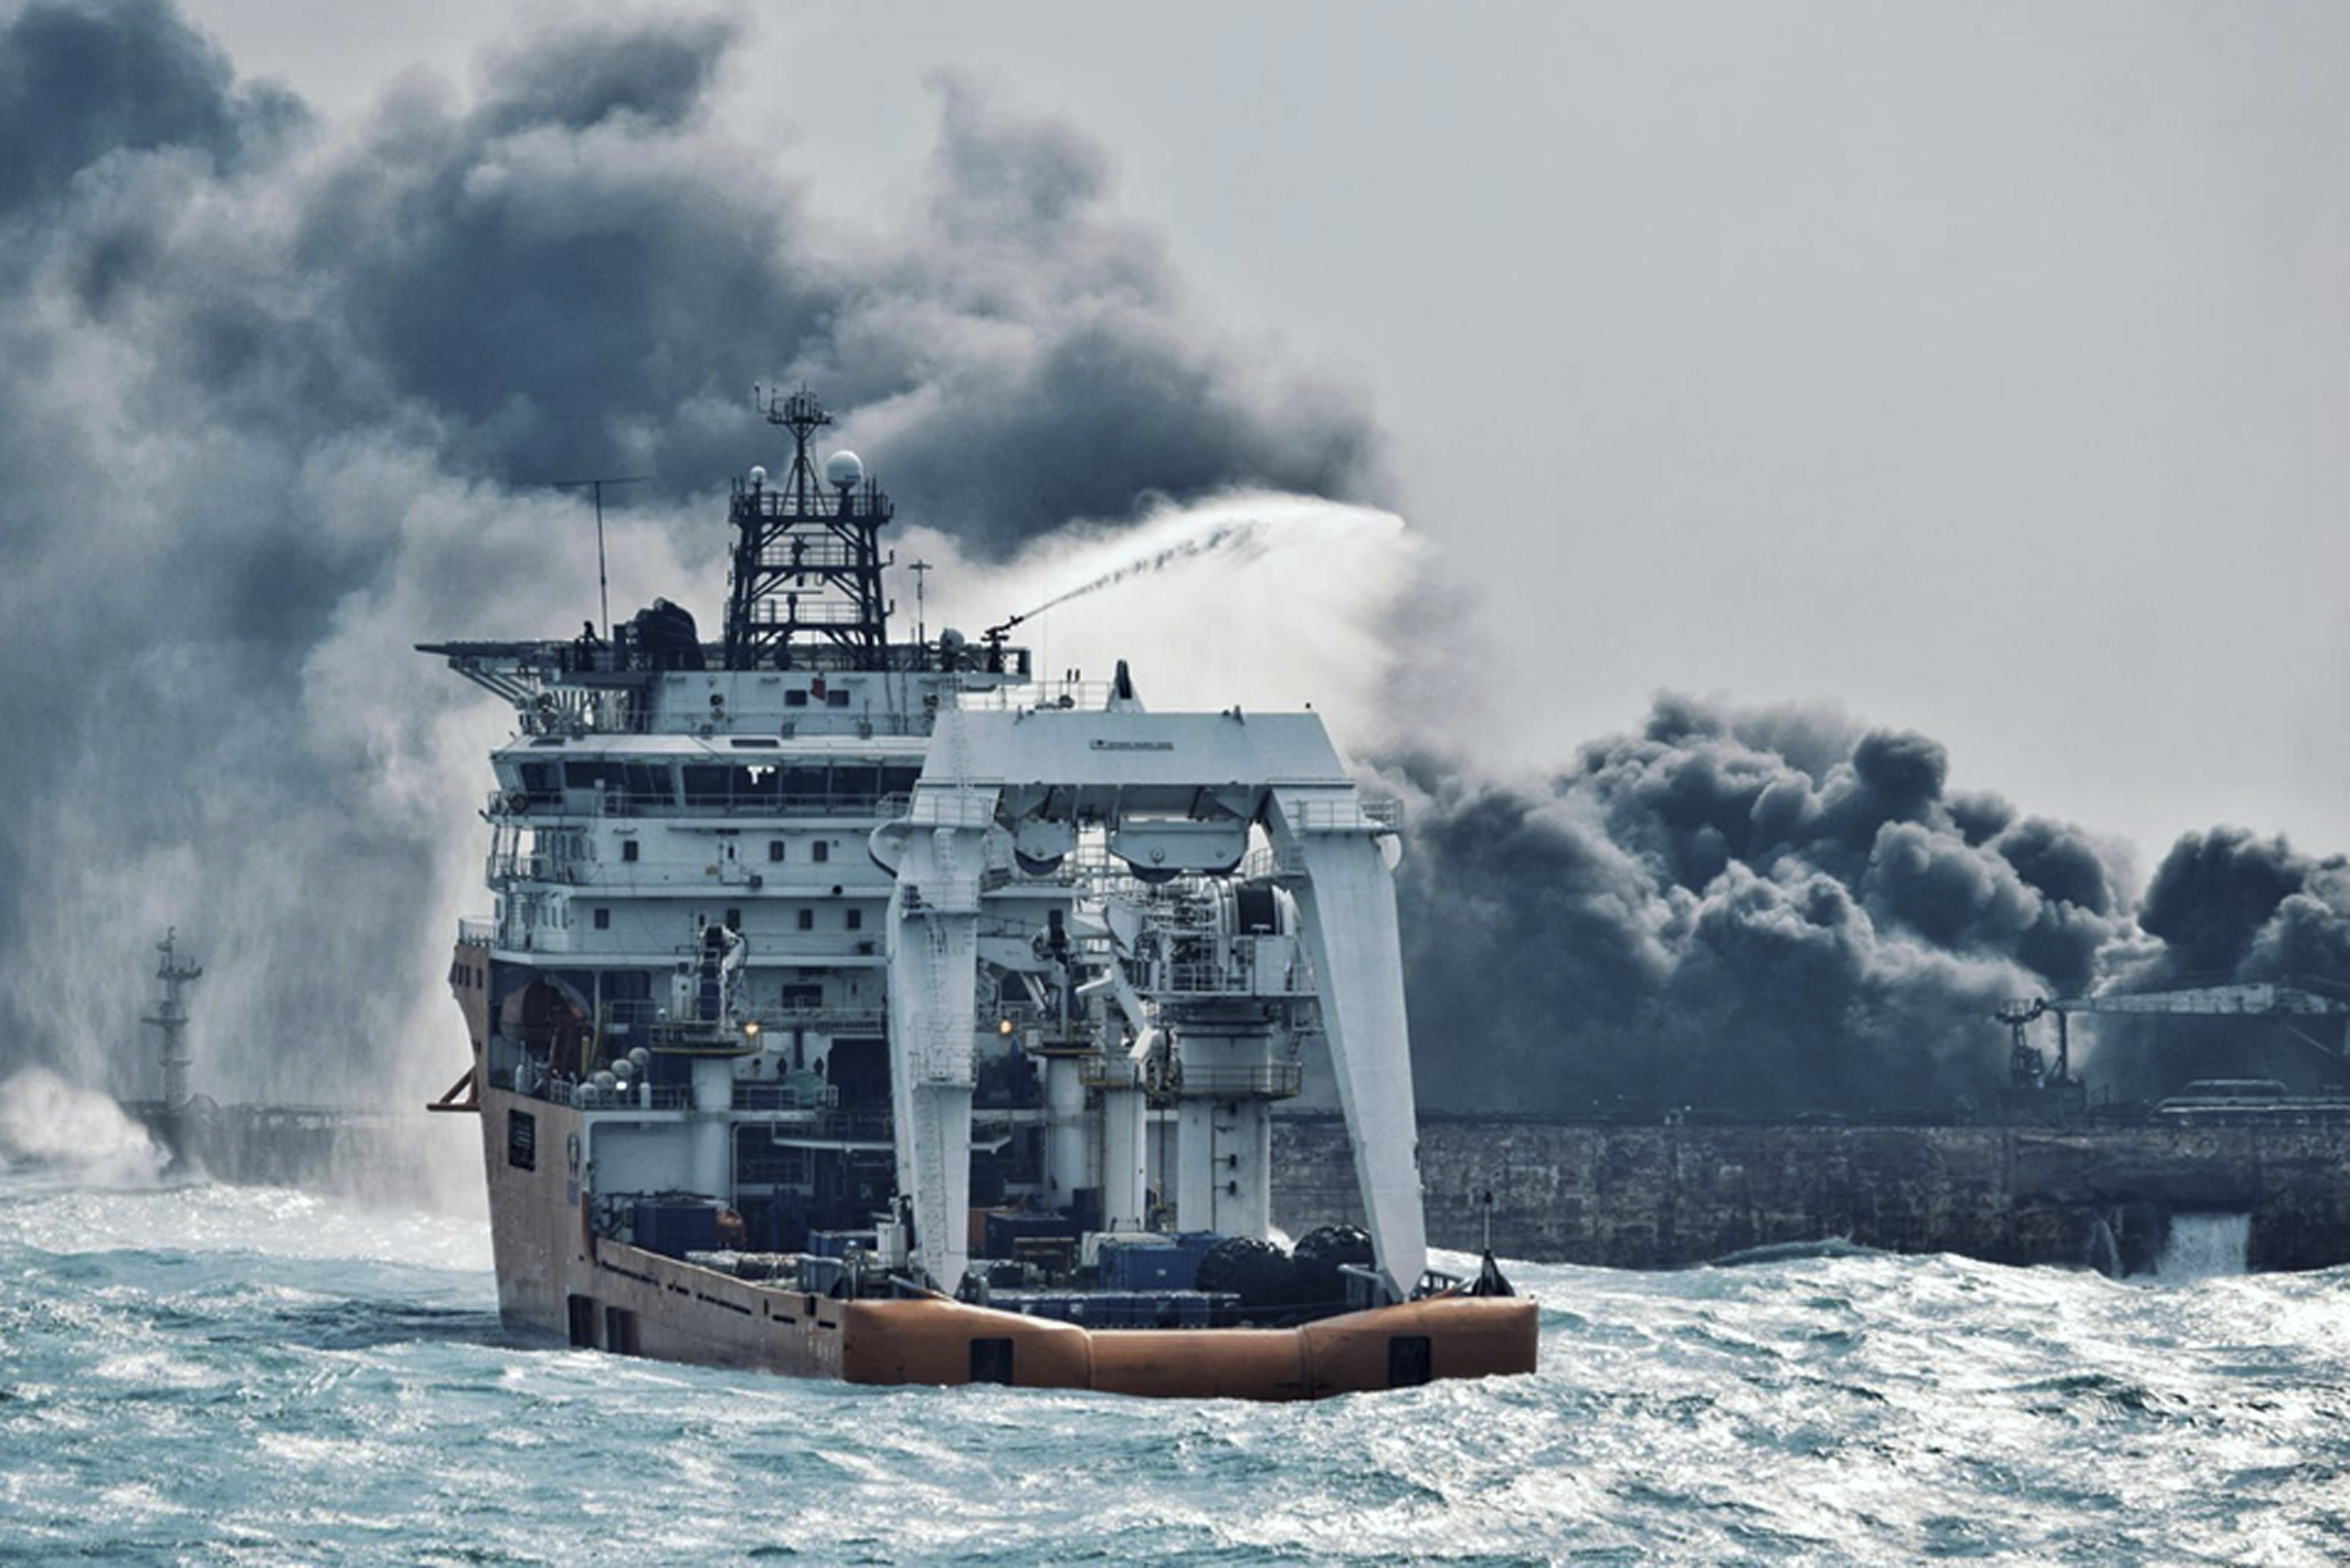 In this Jan. 10, 2018 photo provided by China's Ministry of Transport, a firefighting boat works to put on a blaze on the oil tanker Sanchi in the East China Sea off the eastern coast of China. Rescue ships looking for missing crew members from the oil tanker Sanchi have expanded their search area to more than 2,600 square kilometers (1,000 square miles) as Chinese state television reported Friday that maritime authorities still have not found any survivors, or put out the blaze onboard the ship. (China's Ministry of Transport via AP)